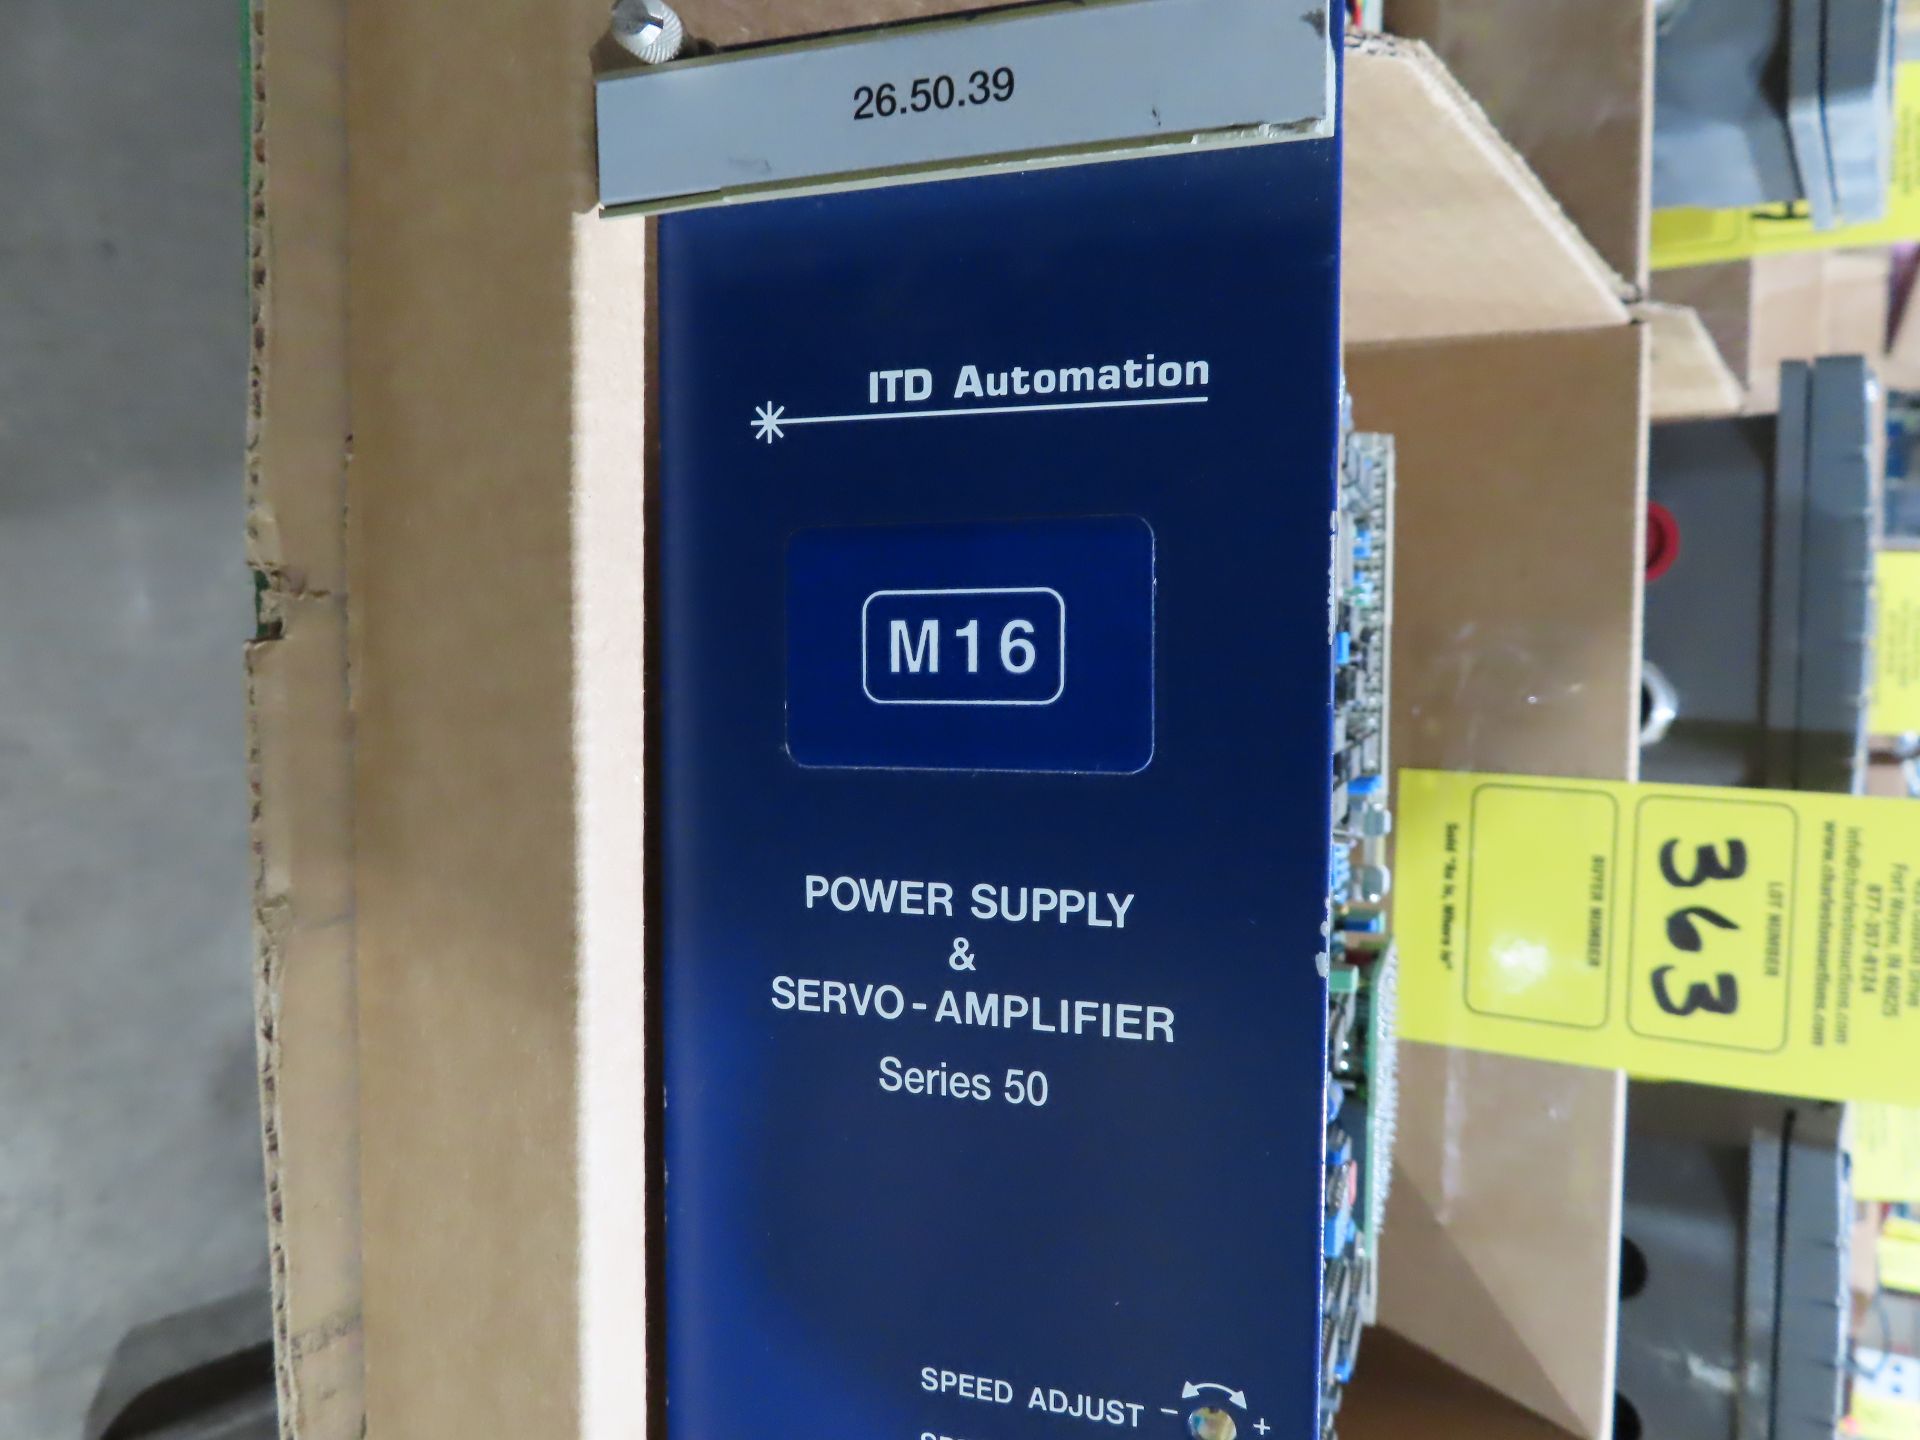 ITD Automation power supply and servo amplifier series 50, as always, with Brolyn LLC auctions, - Image 2 of 2